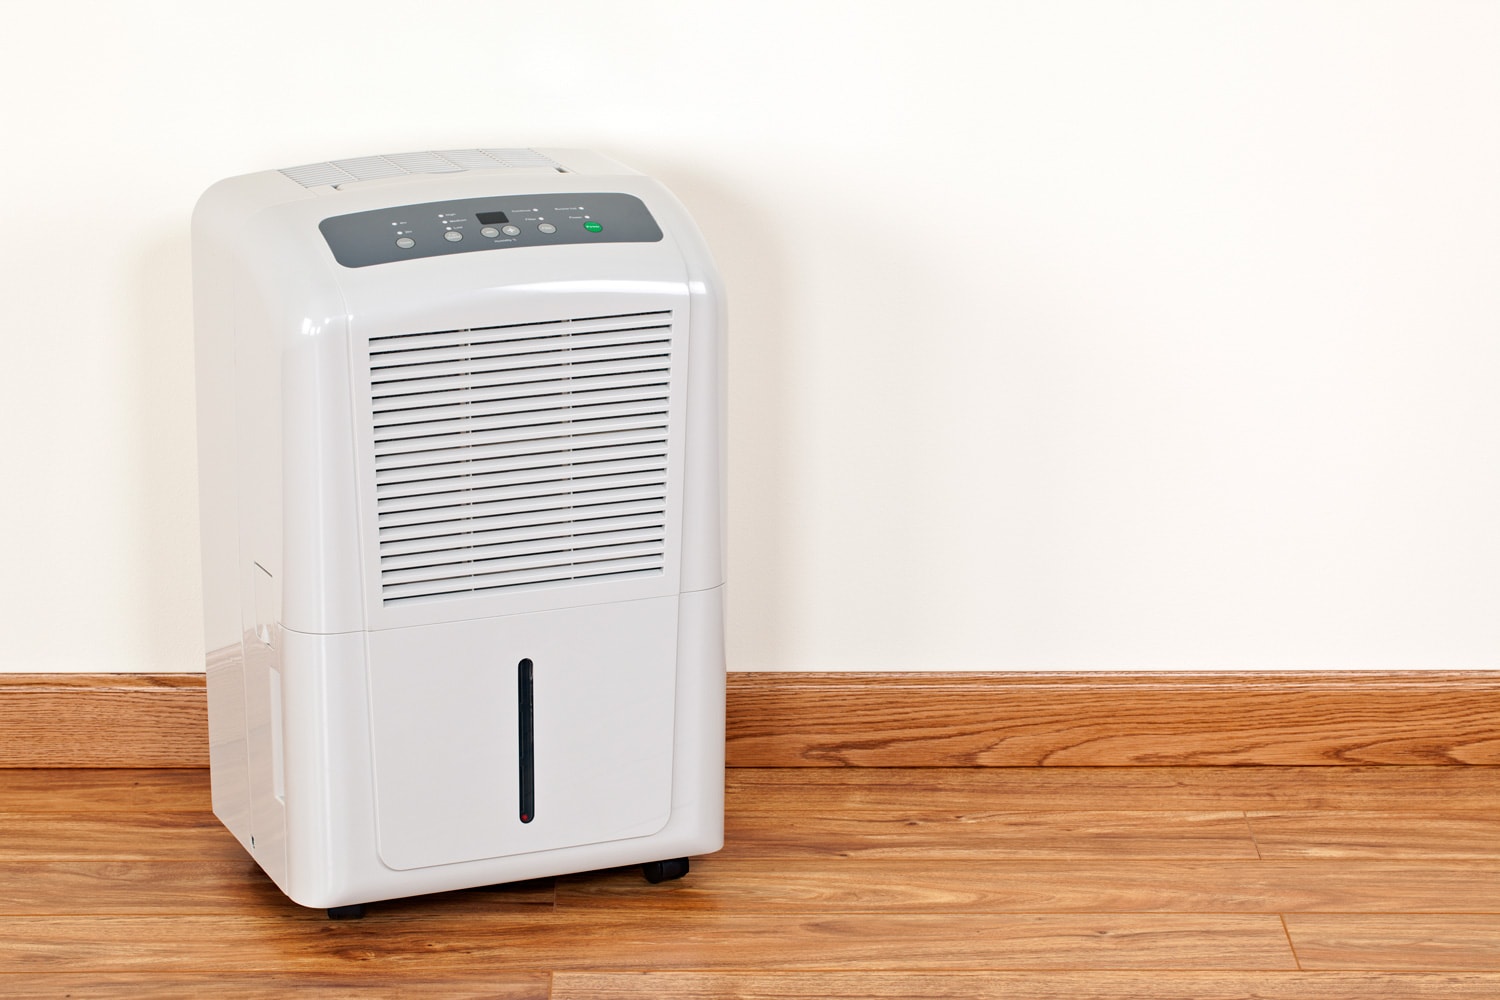 Dehumidifiers extract moisture from the air to reduce the level of humidity in the area.